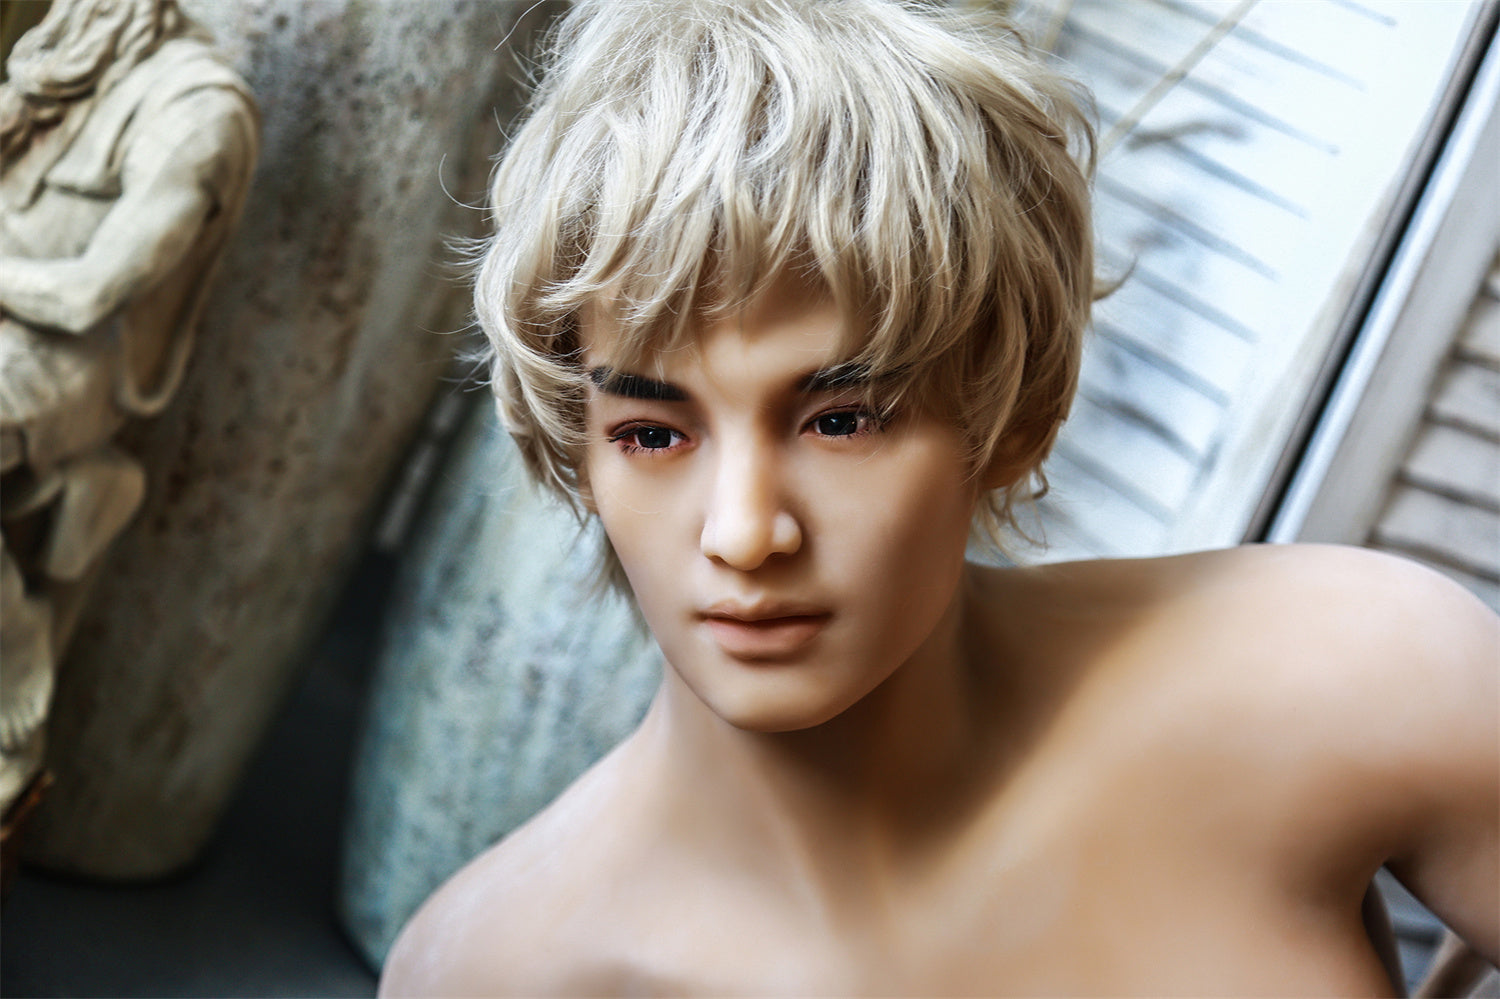 QITA Doll 175 cm Male TPE - Tang | Buy Sex Dolls at DOLLS ACTUALLY